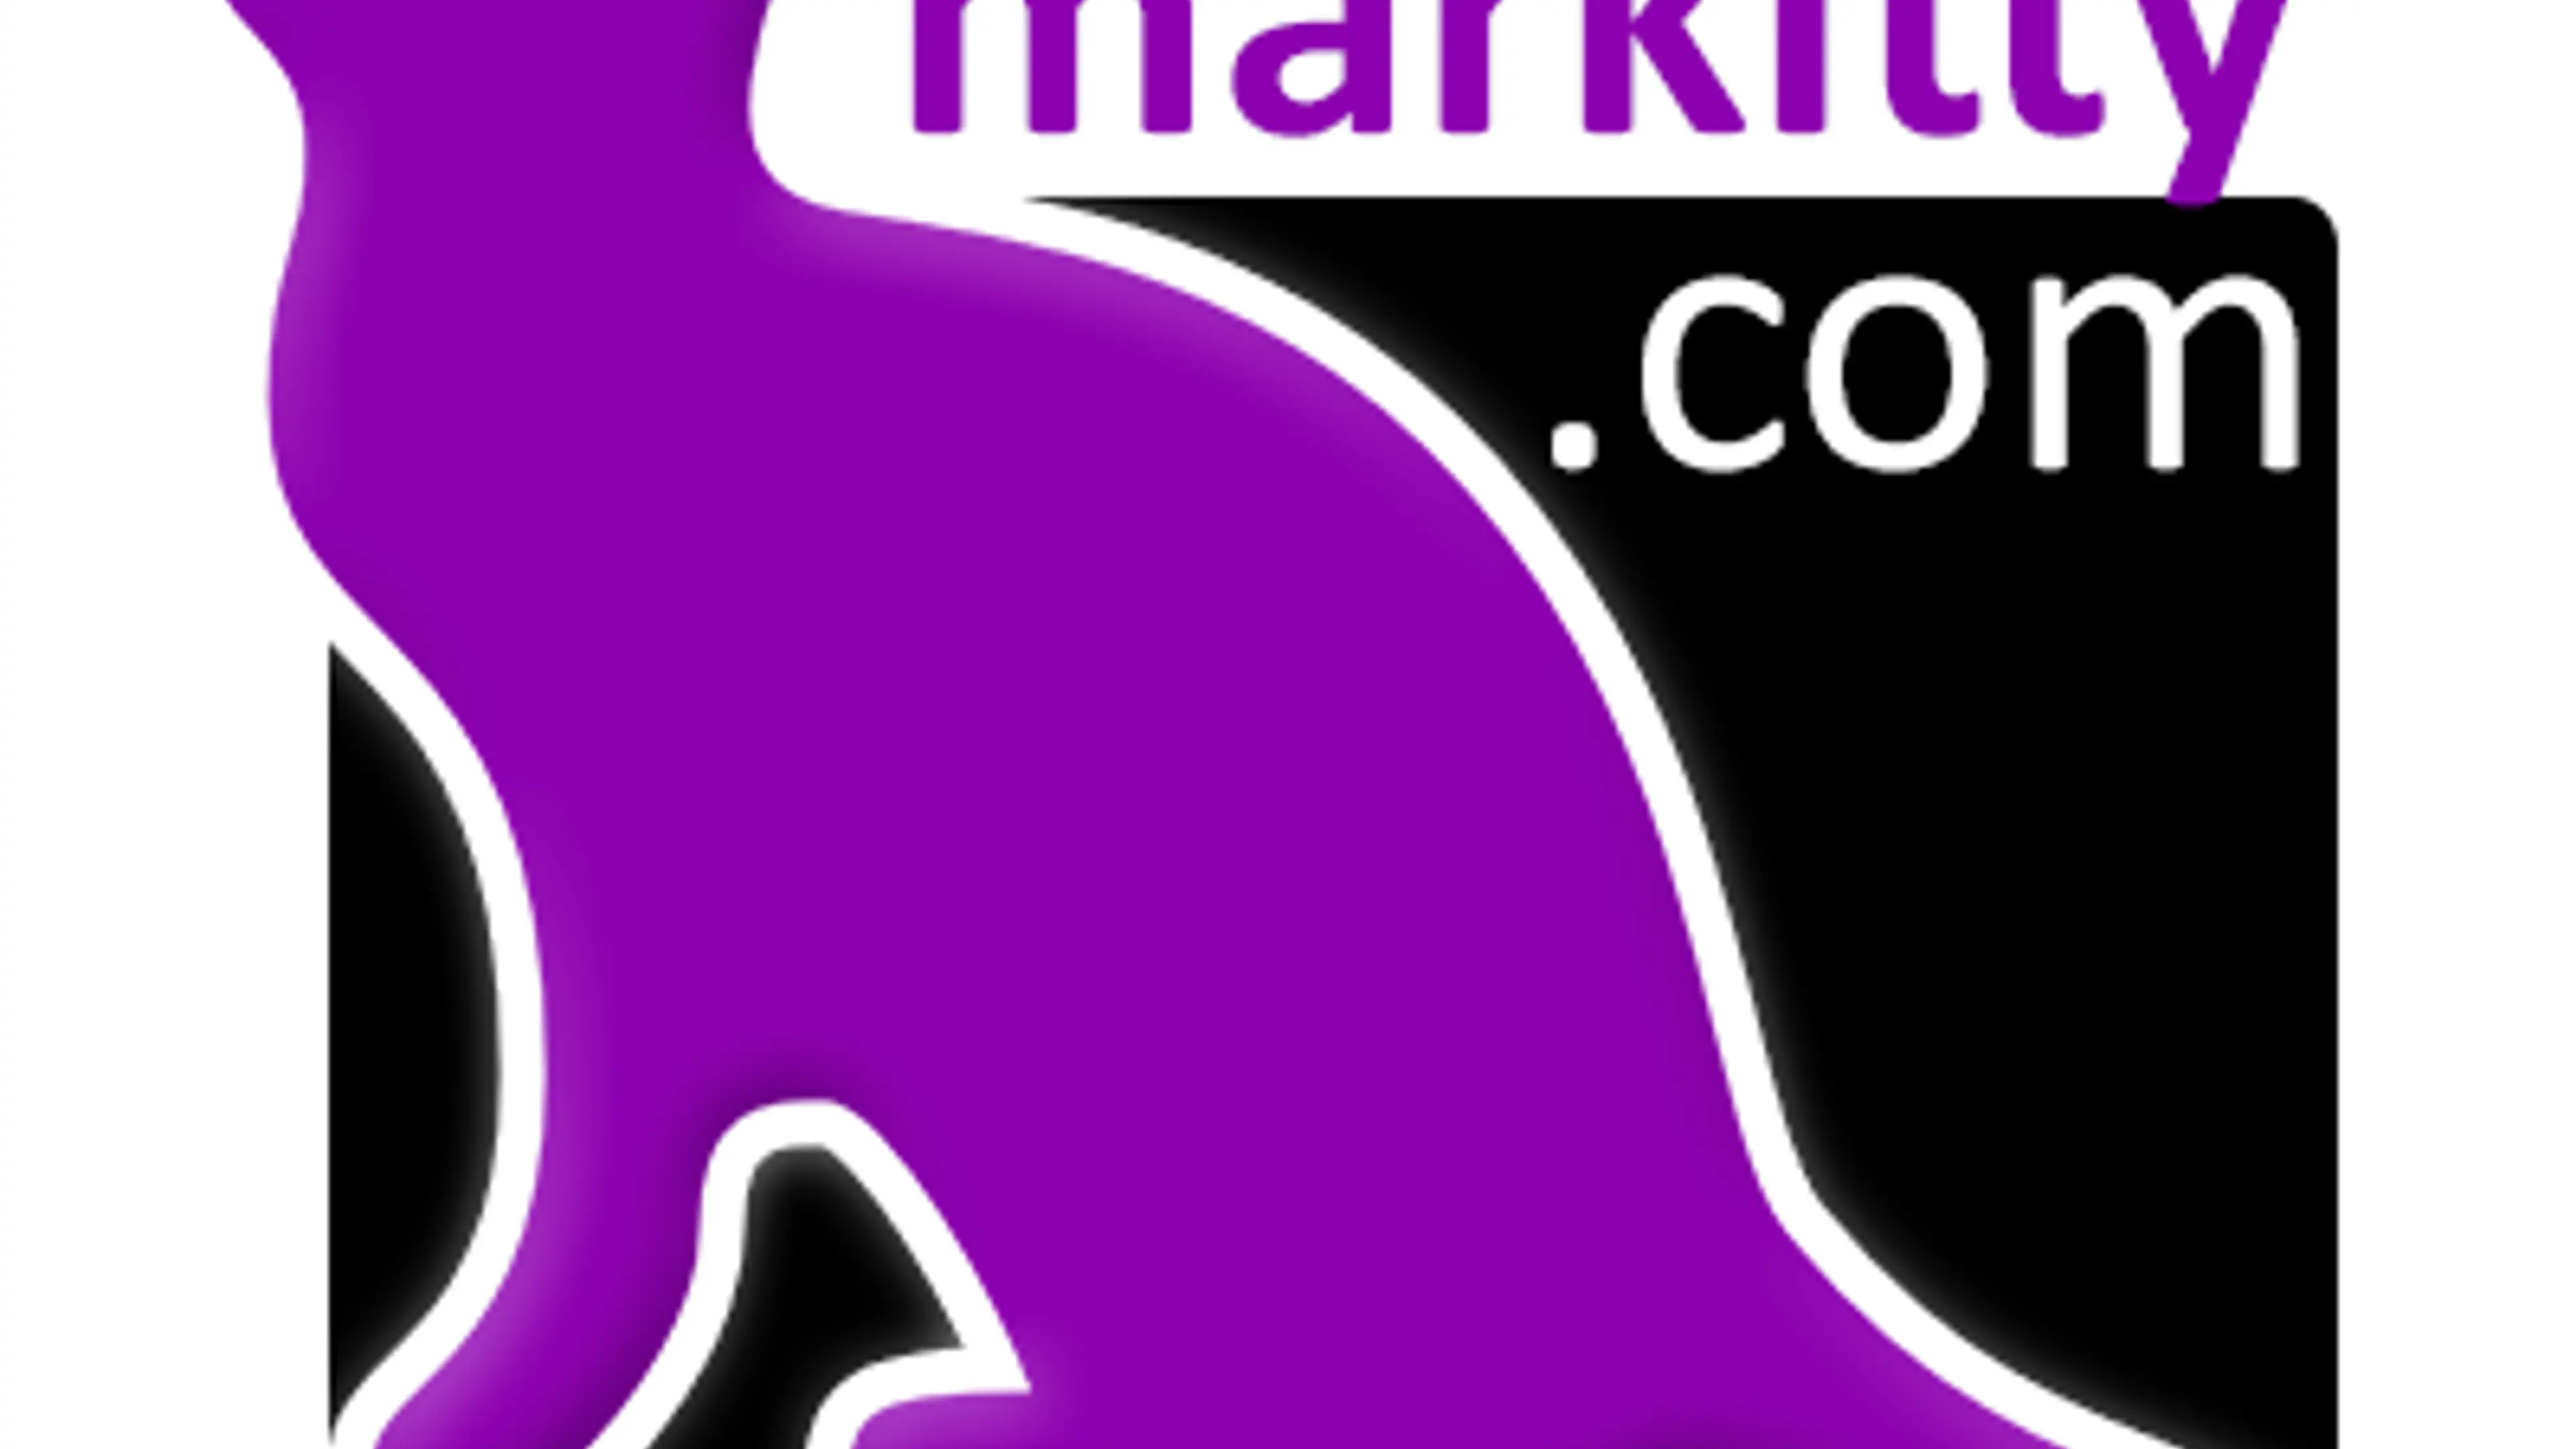 Markitty – providing analysis and recommendations for better online marketing